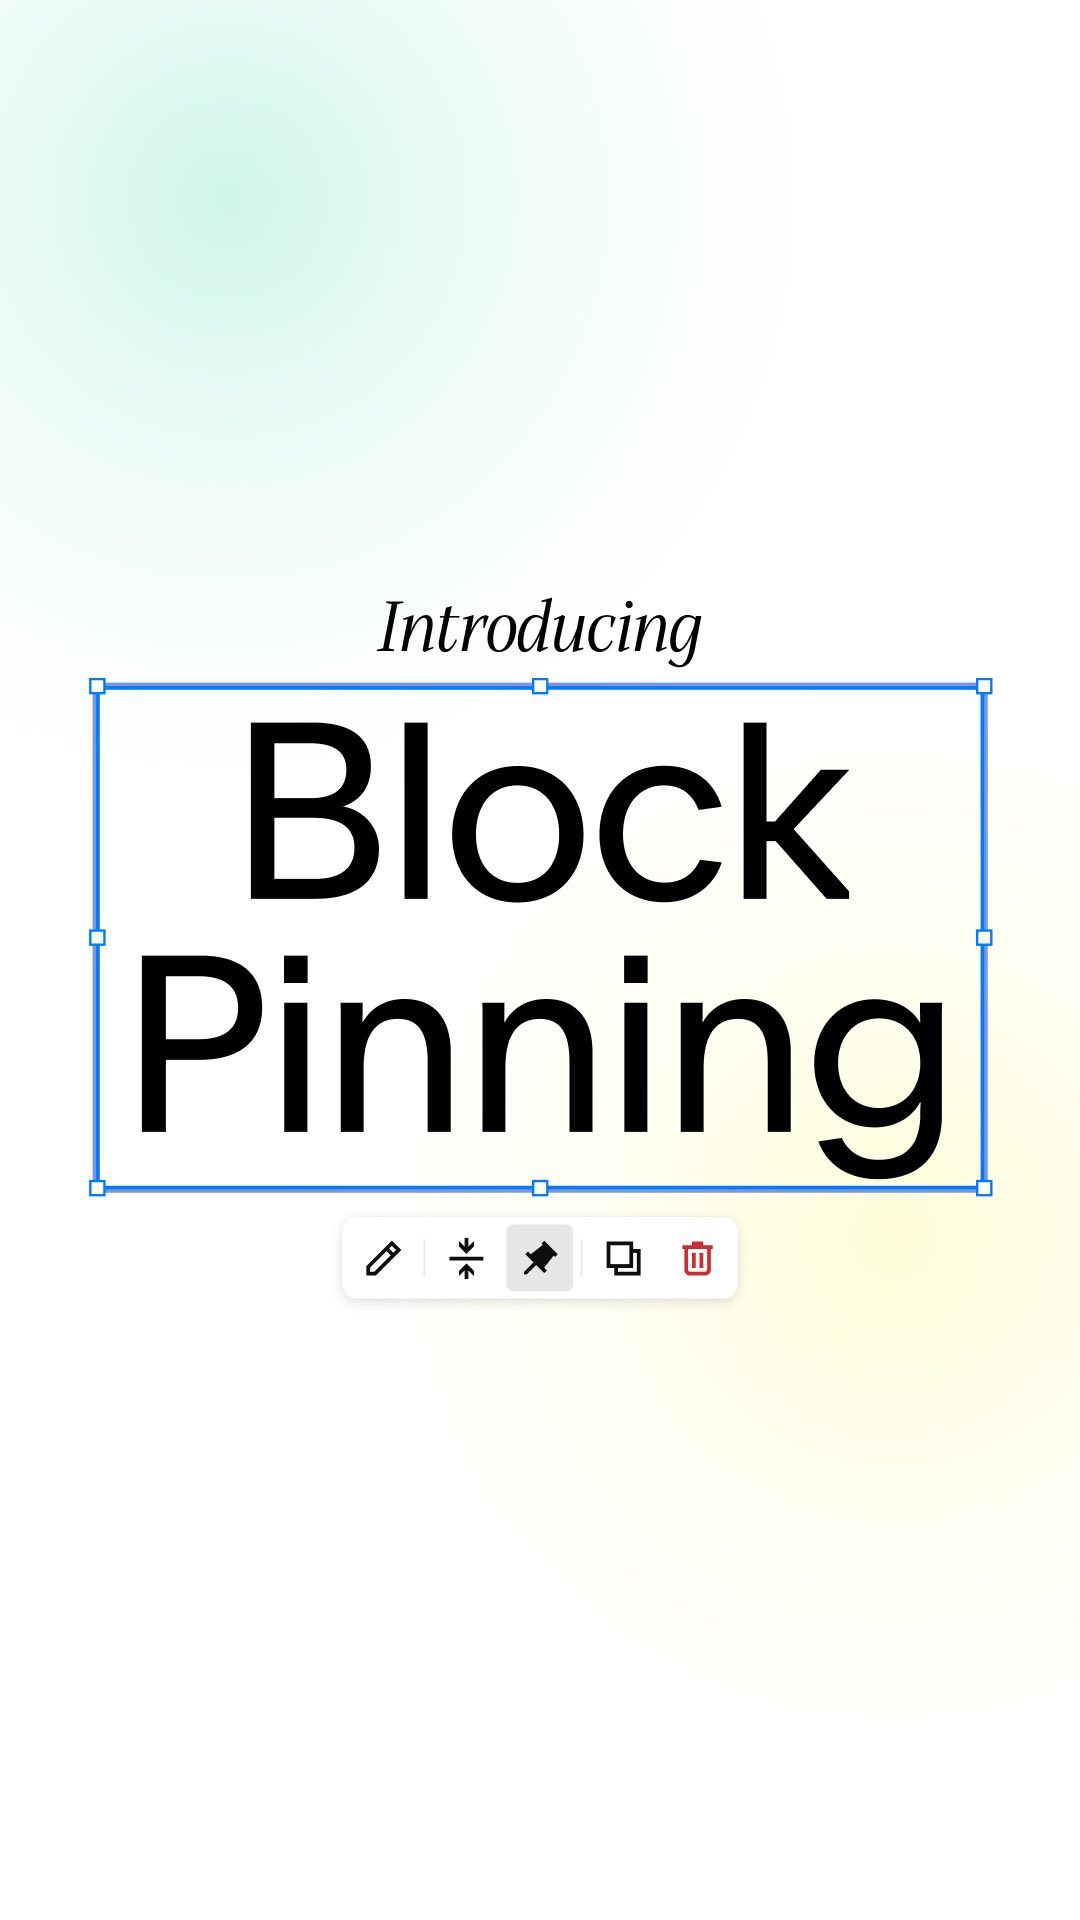 Pin, stack, layer, scroll 📌 With Block Pinning, you can pin your most important website content to create dynamic scroll